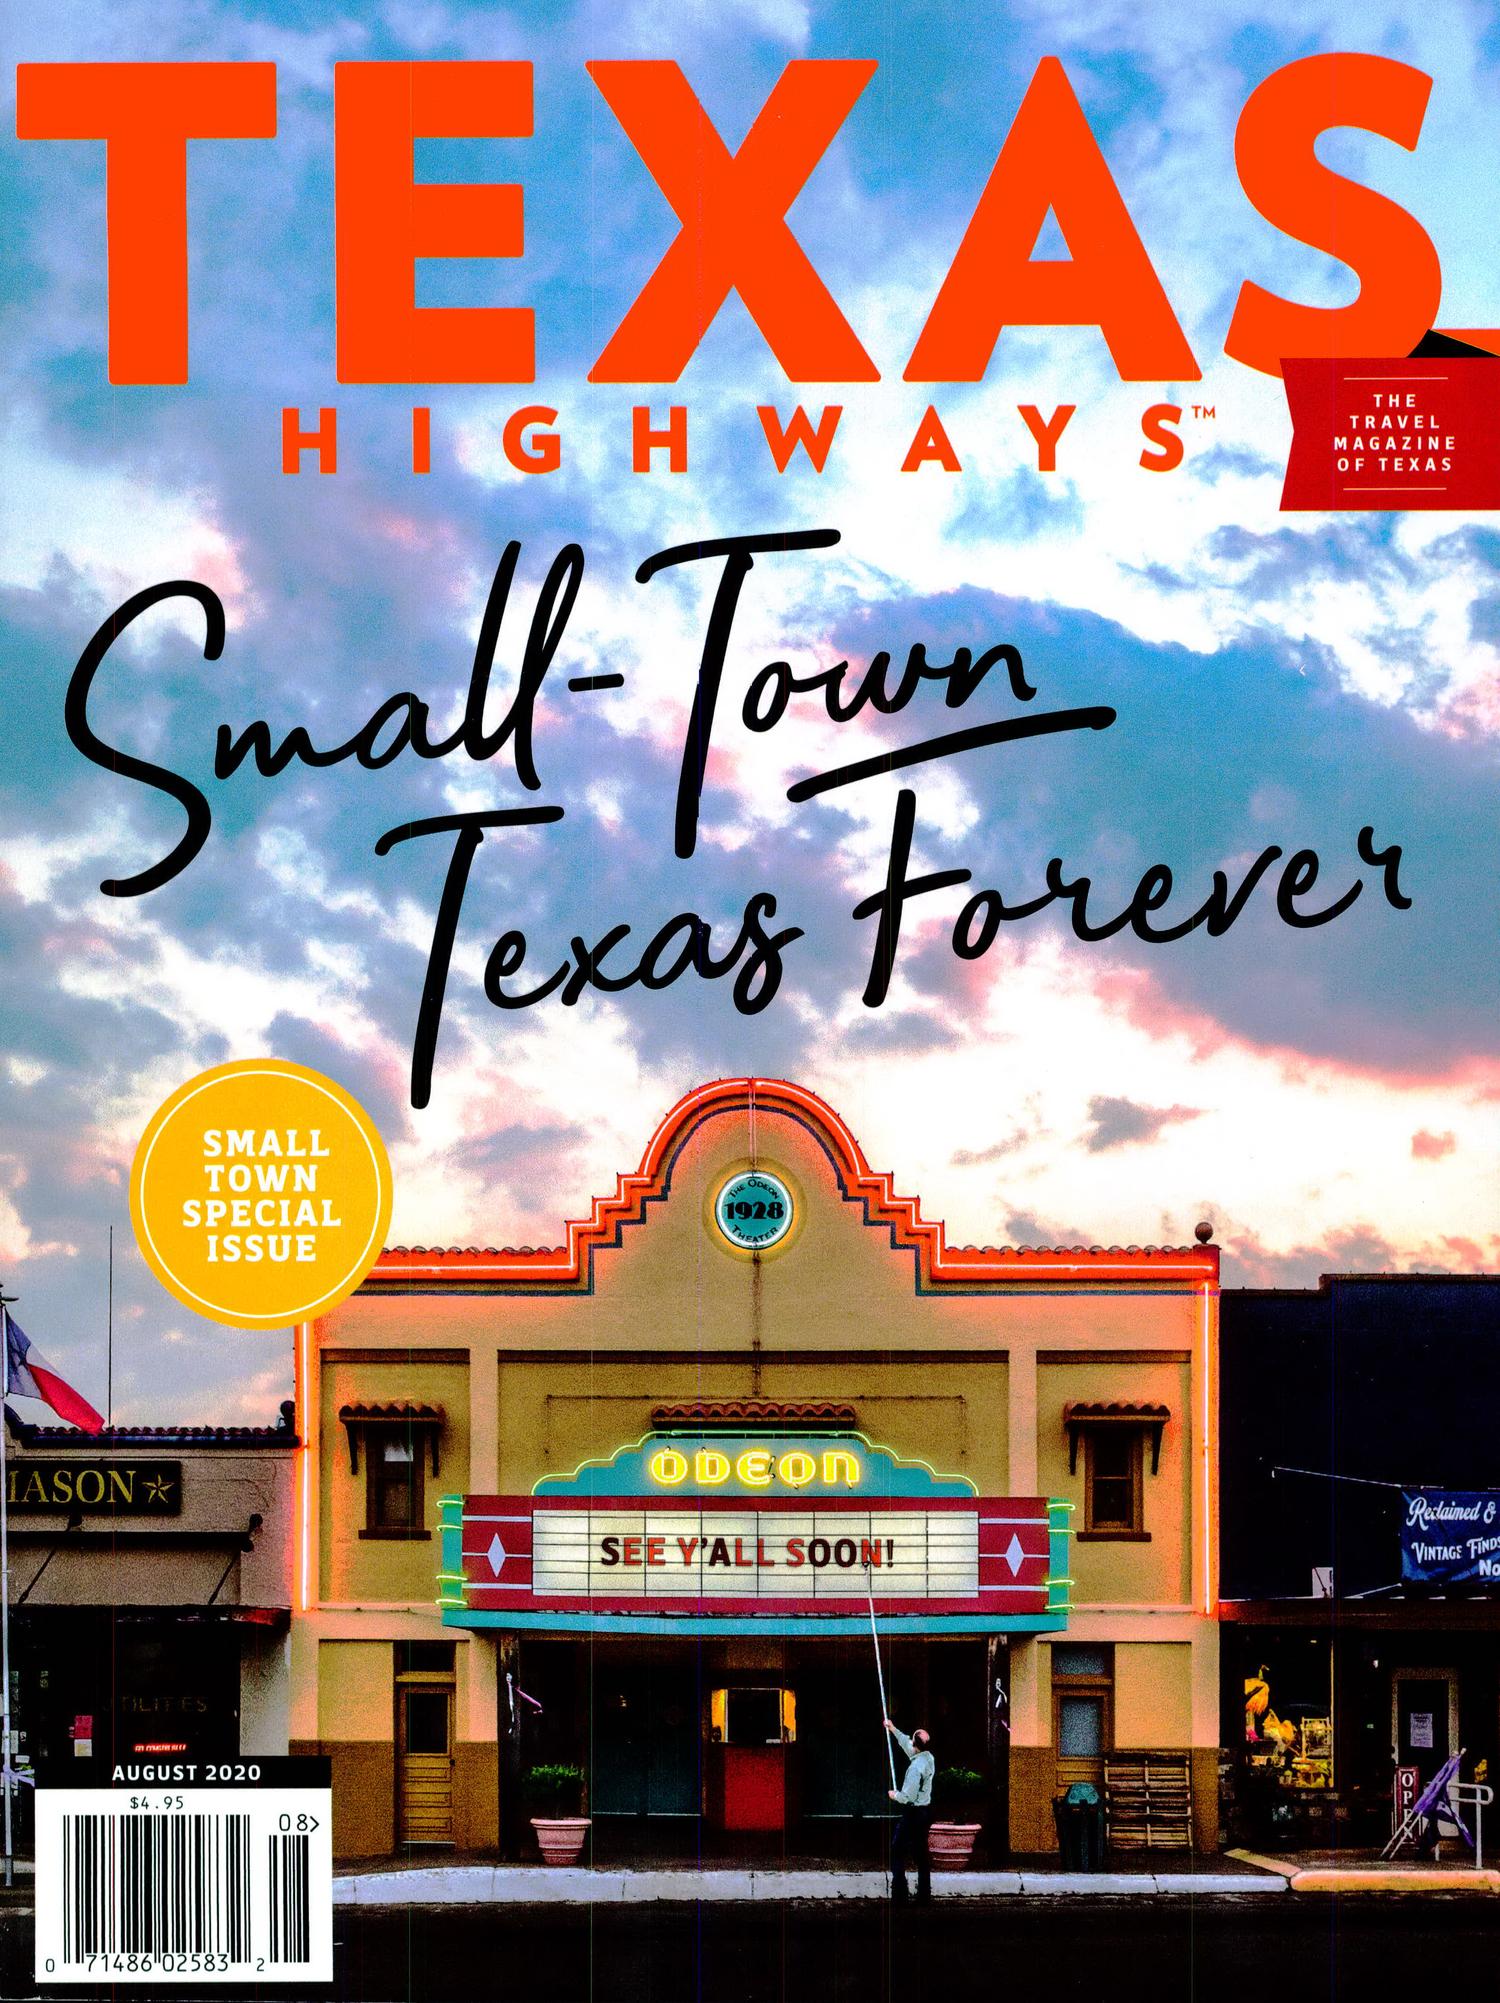 Texas Highways, Volume 67, Number 8, August 2020
                                                
                                                    FRONT COVER
                                                